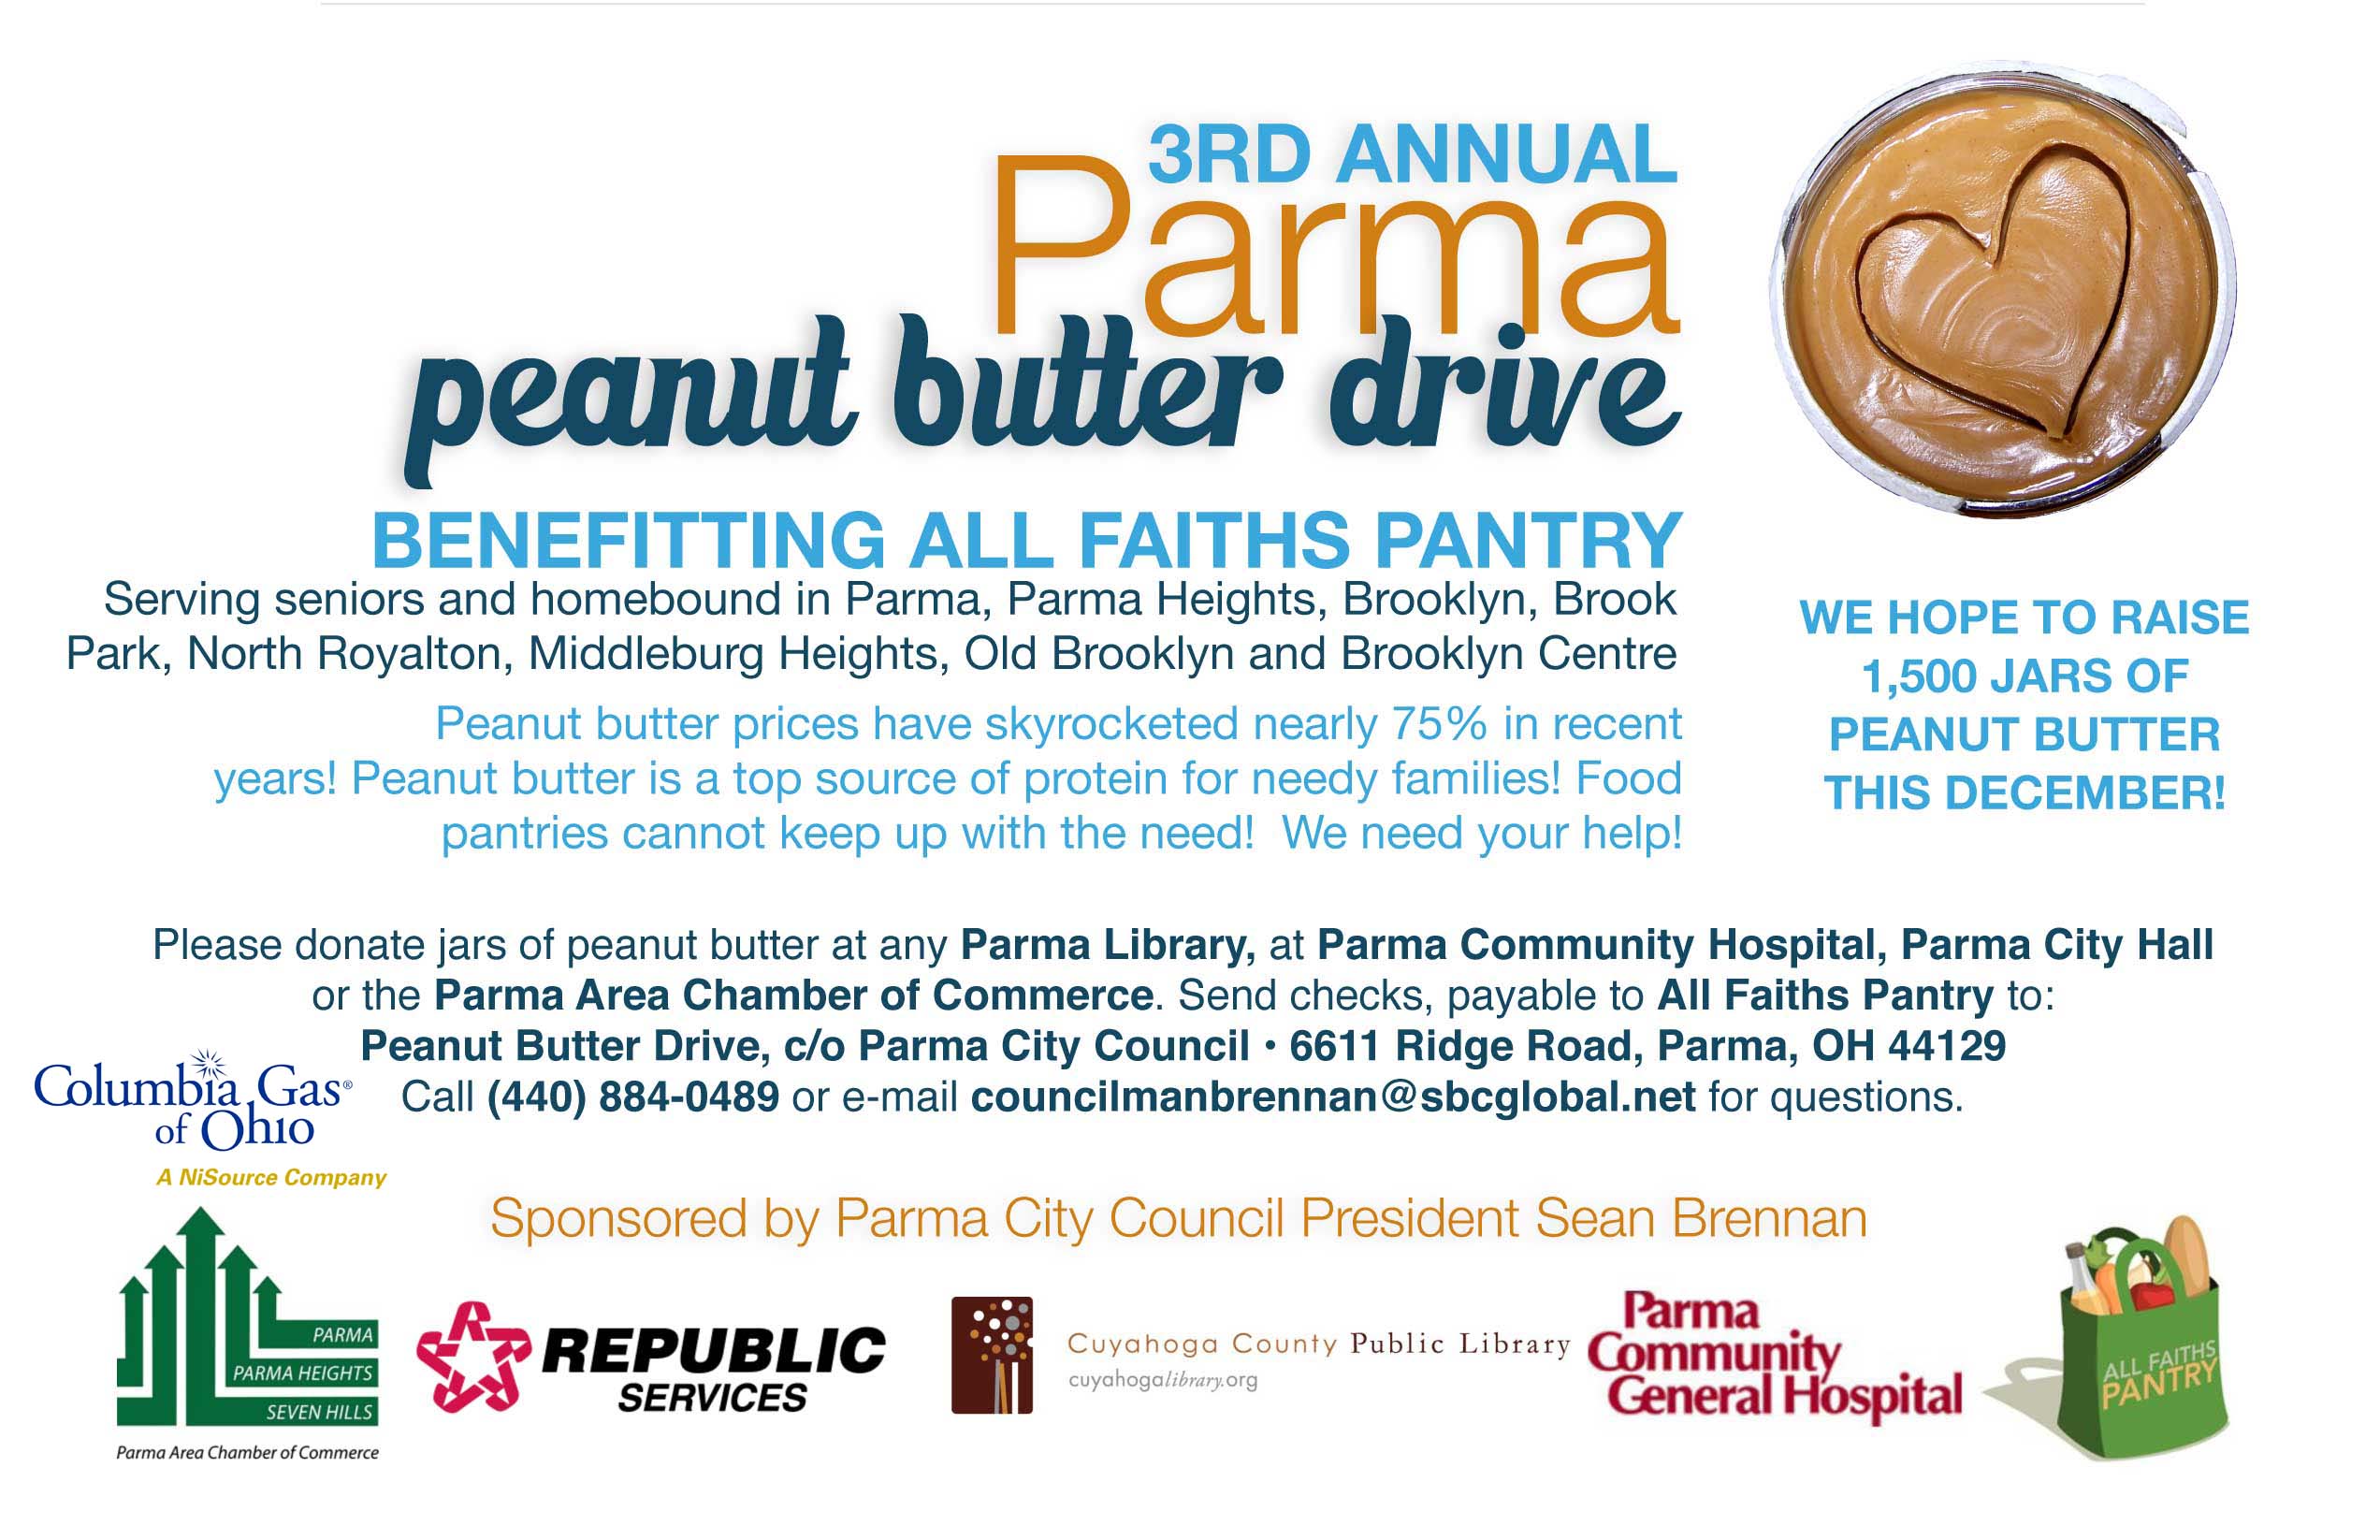 PRESS RELEASE – 2013 The Third Annual Parma Peanut Butter Drive